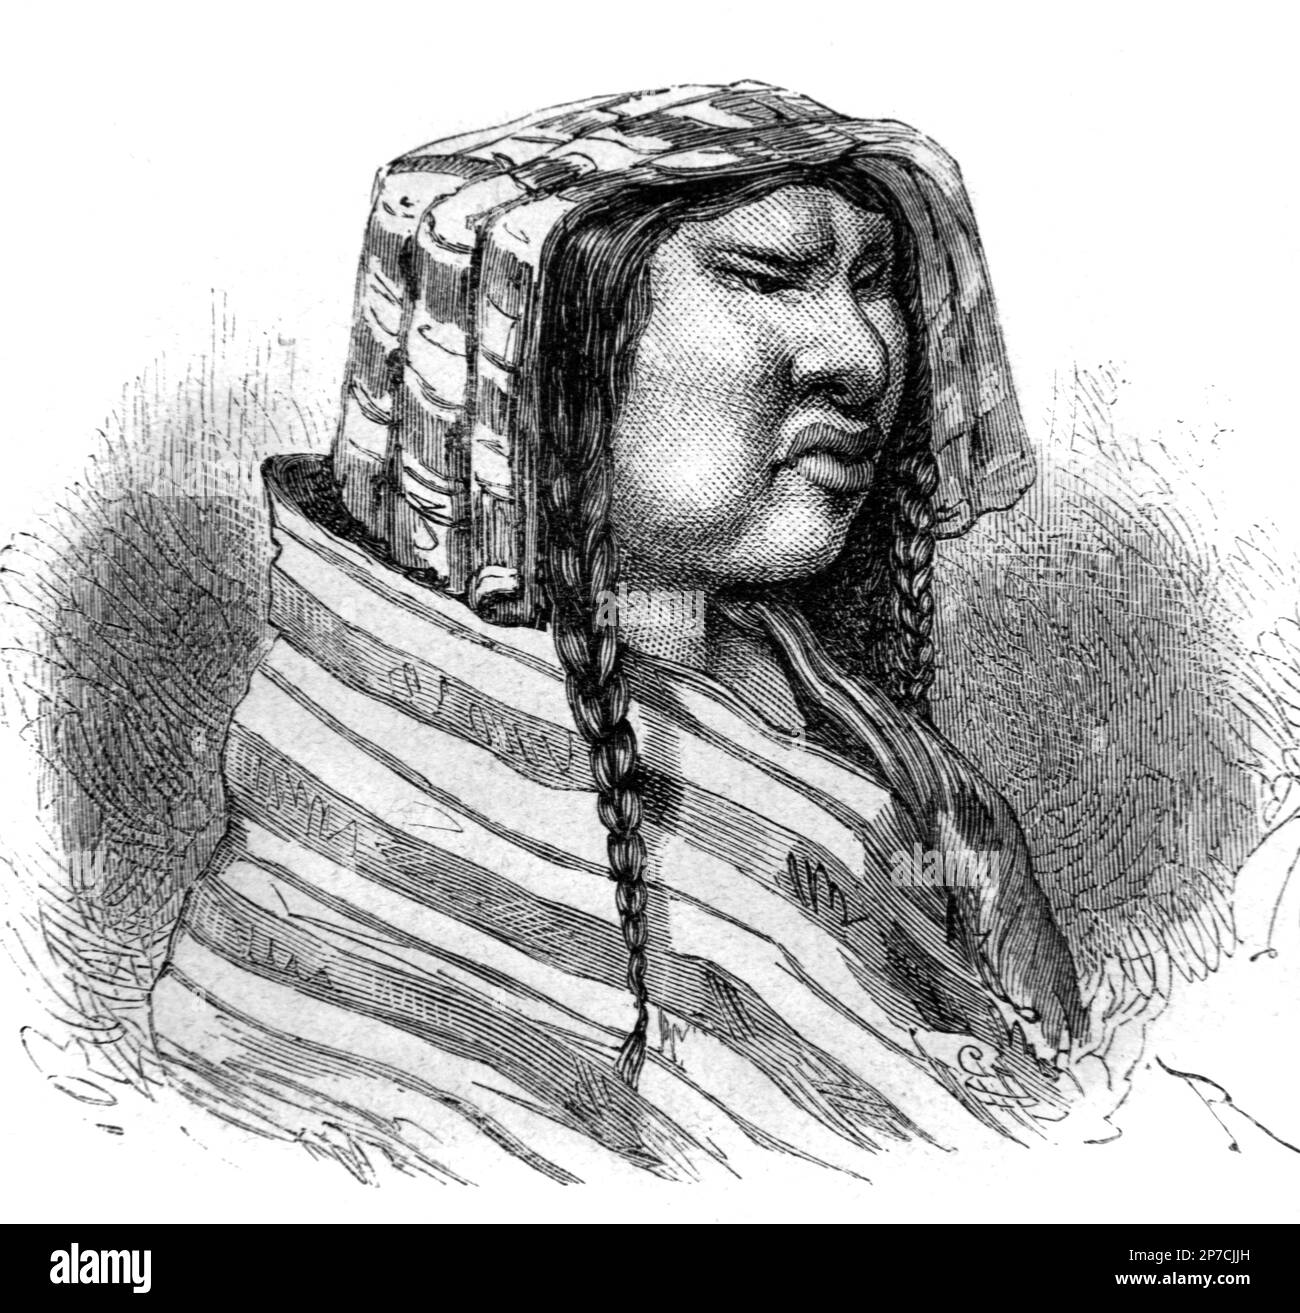 Portrait of Quechua Woman, Indigenous People of South America, particularly Peru and Bolivia. Vintage Engraving or Illustration 1862 Stock Photo